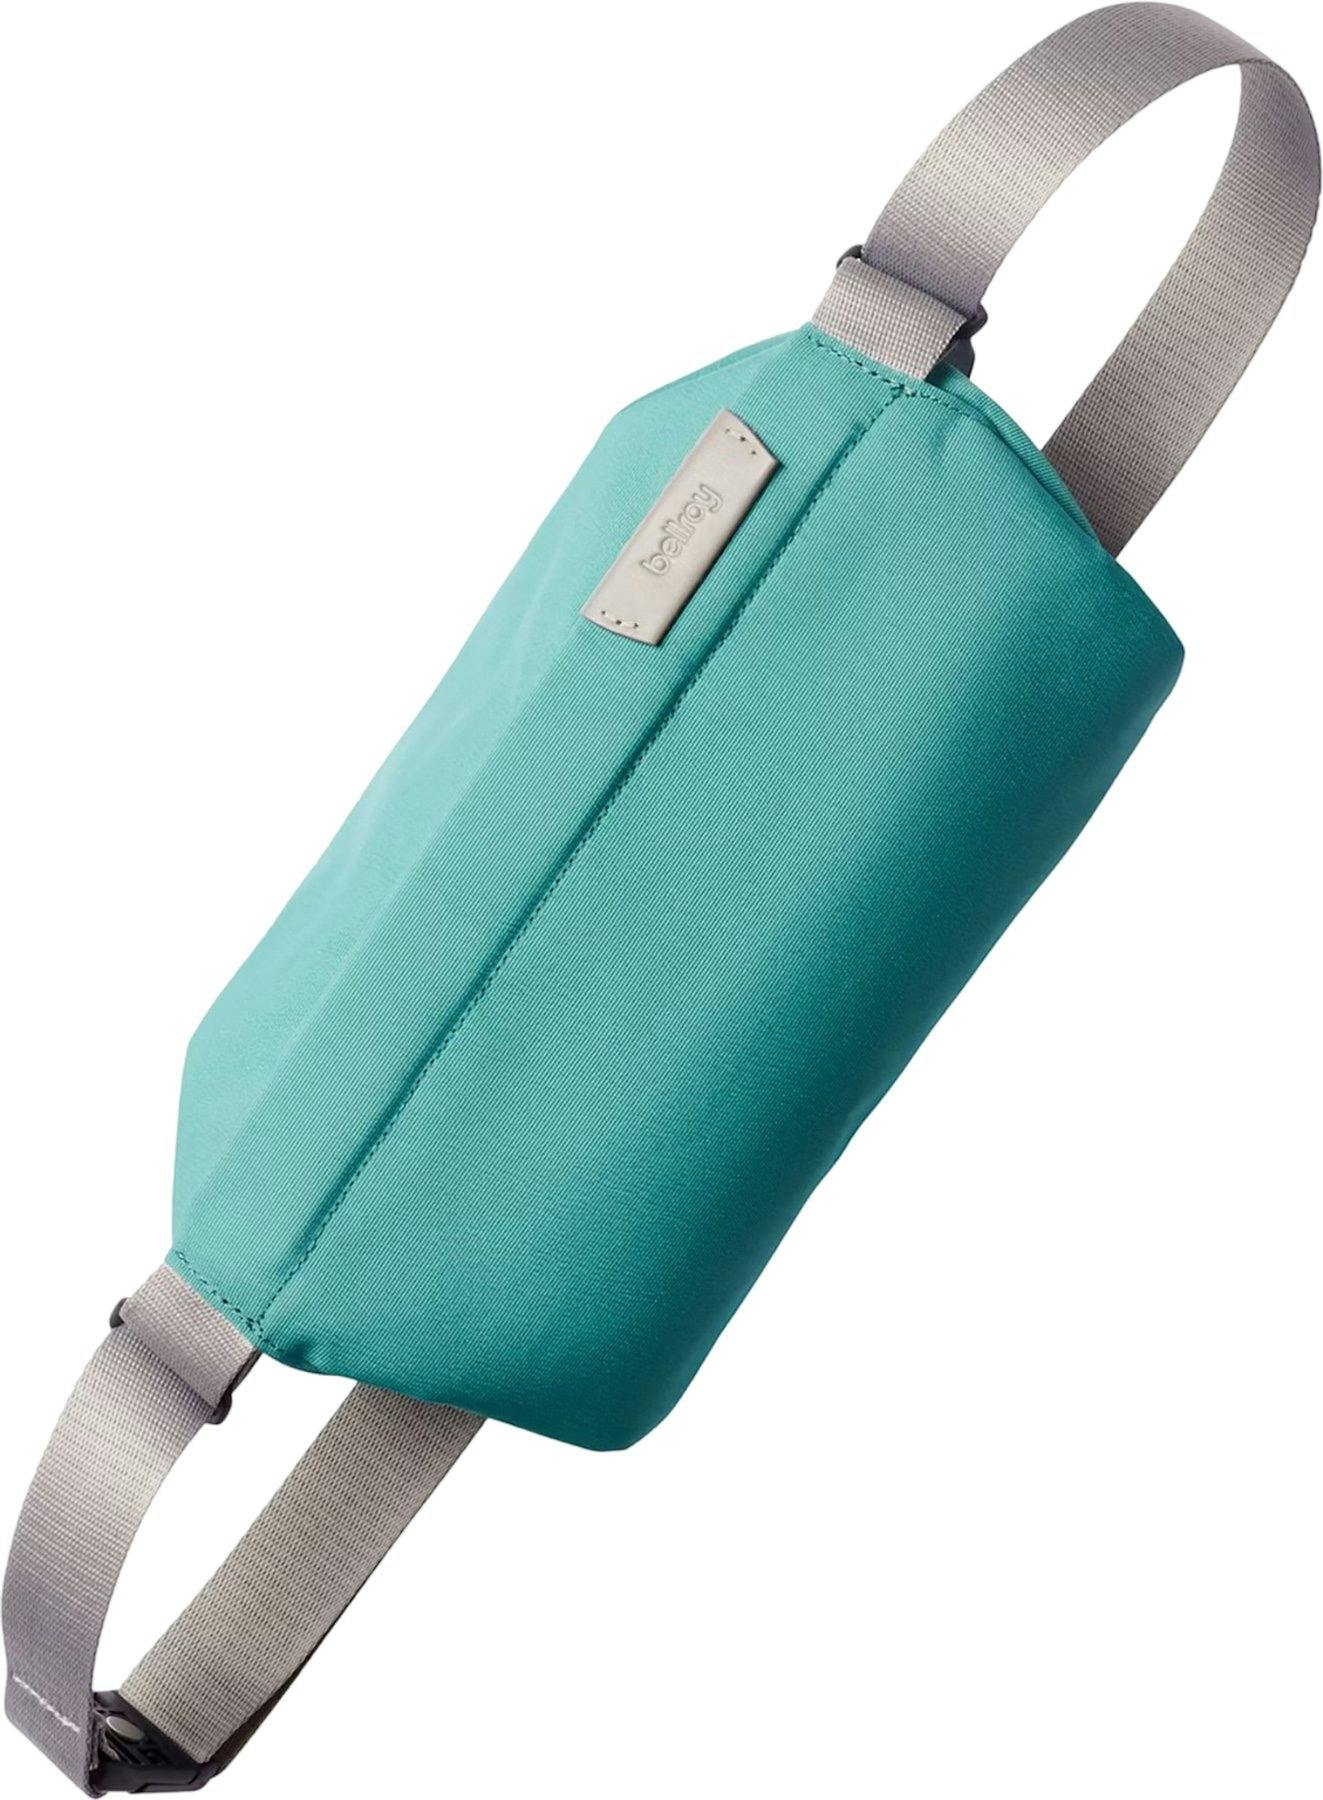 Product image for Sling Mini 4L